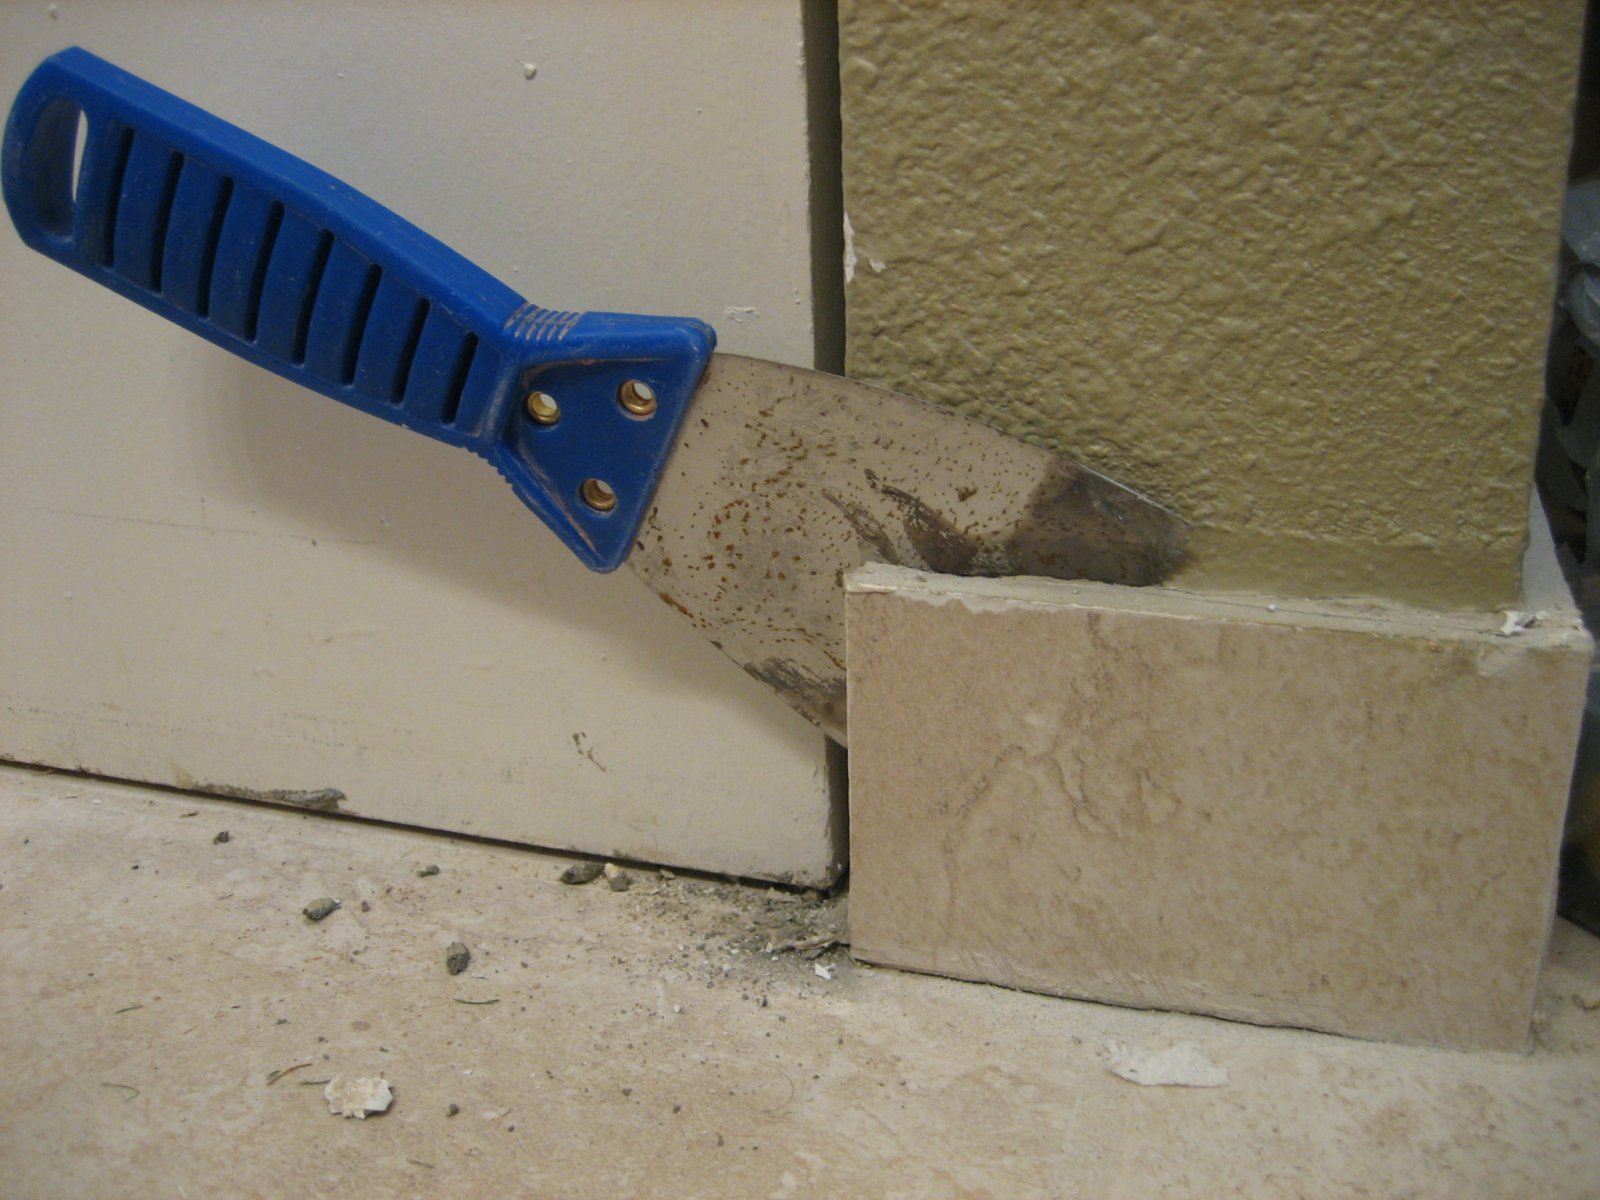 How To Remove Floor Tiles Without, How To Remove Ceramic Tile From Wall Without Breaking